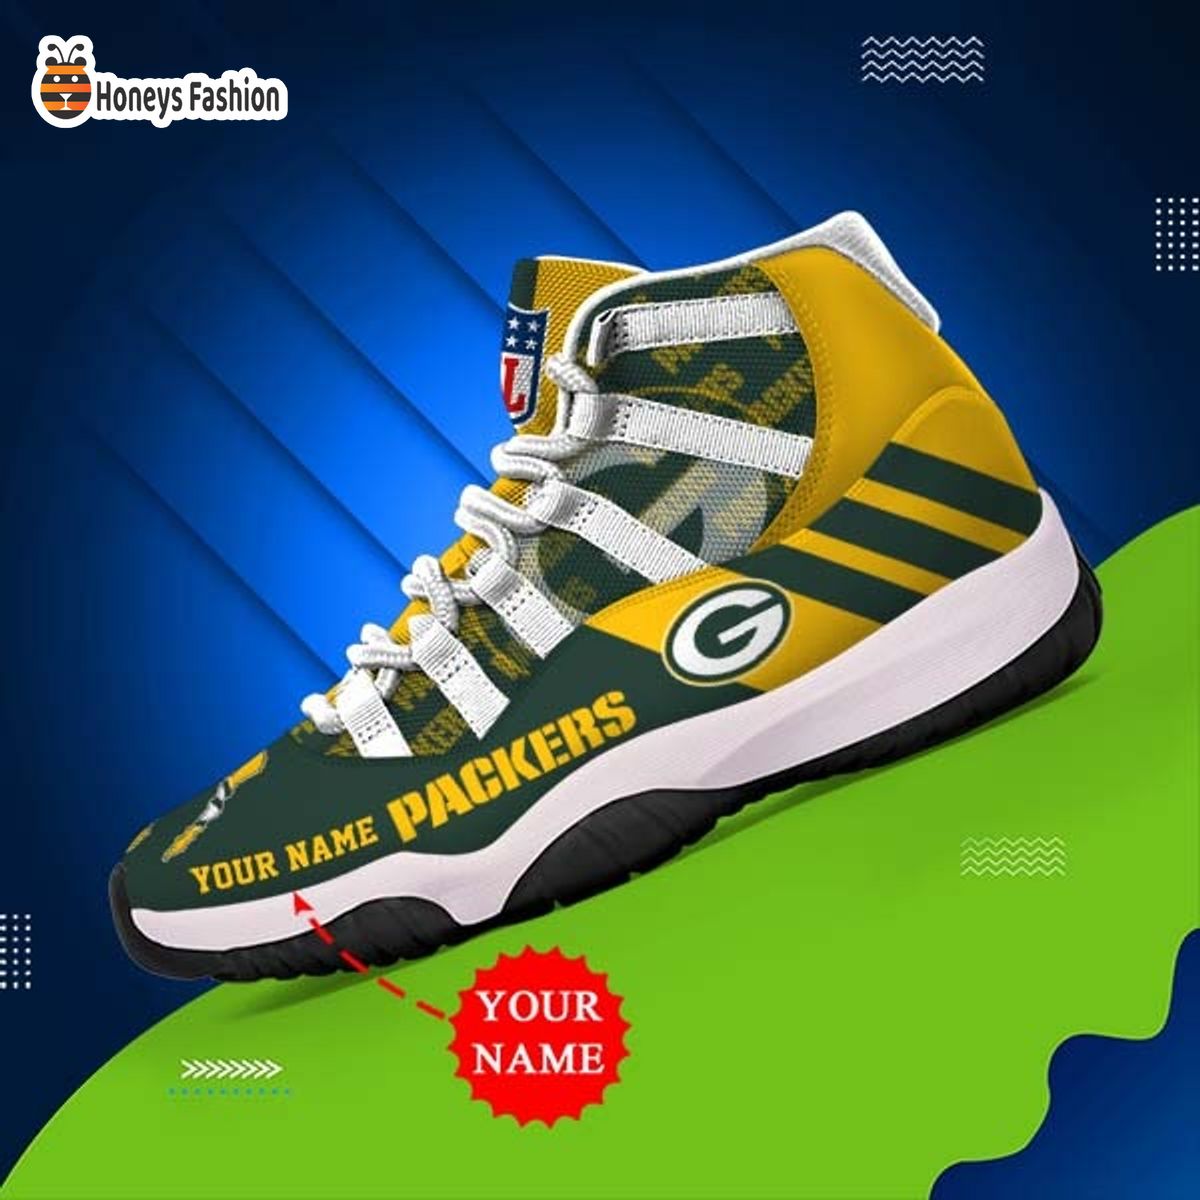 Green Bay Packers NFL Adidas Personalized Air Jordan 11 Shoes